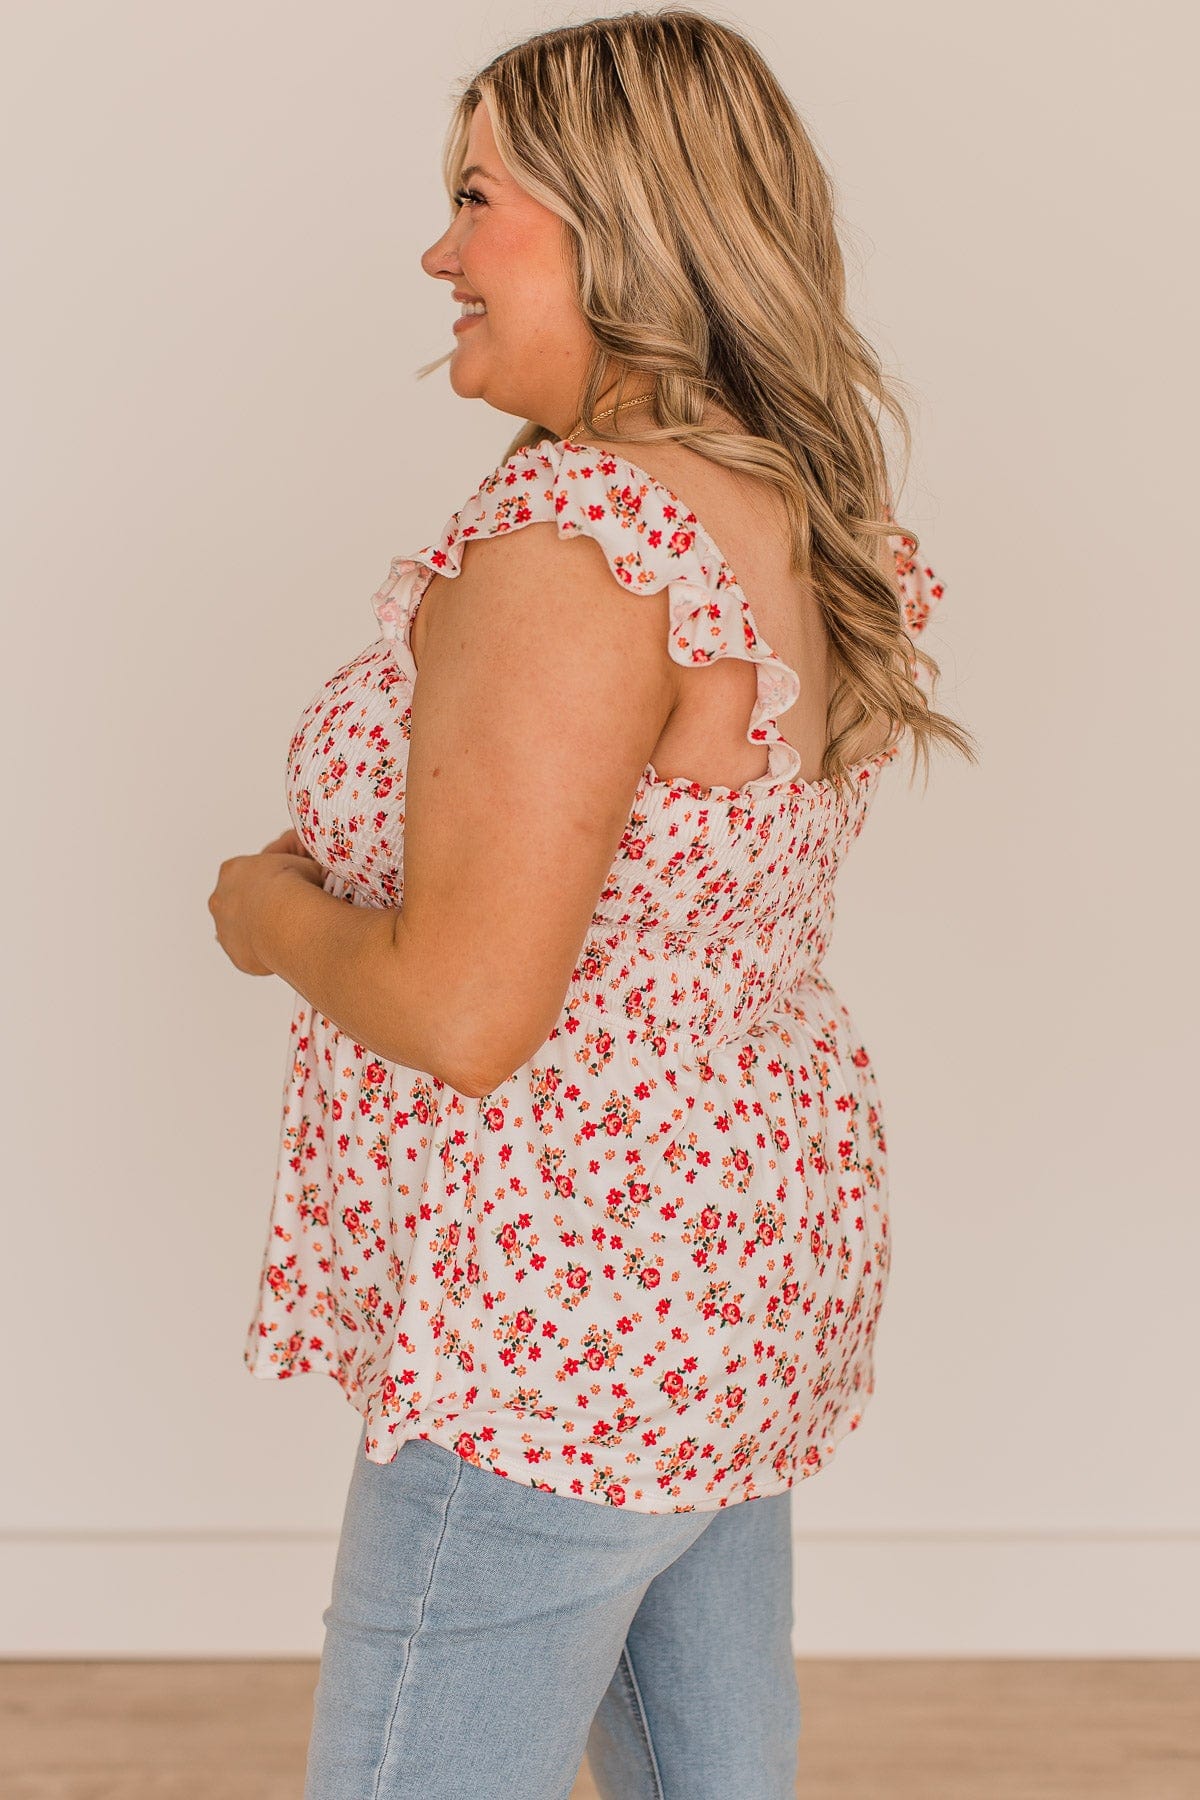 Reach Out To Me Floral Tank Top- Ivory & Red